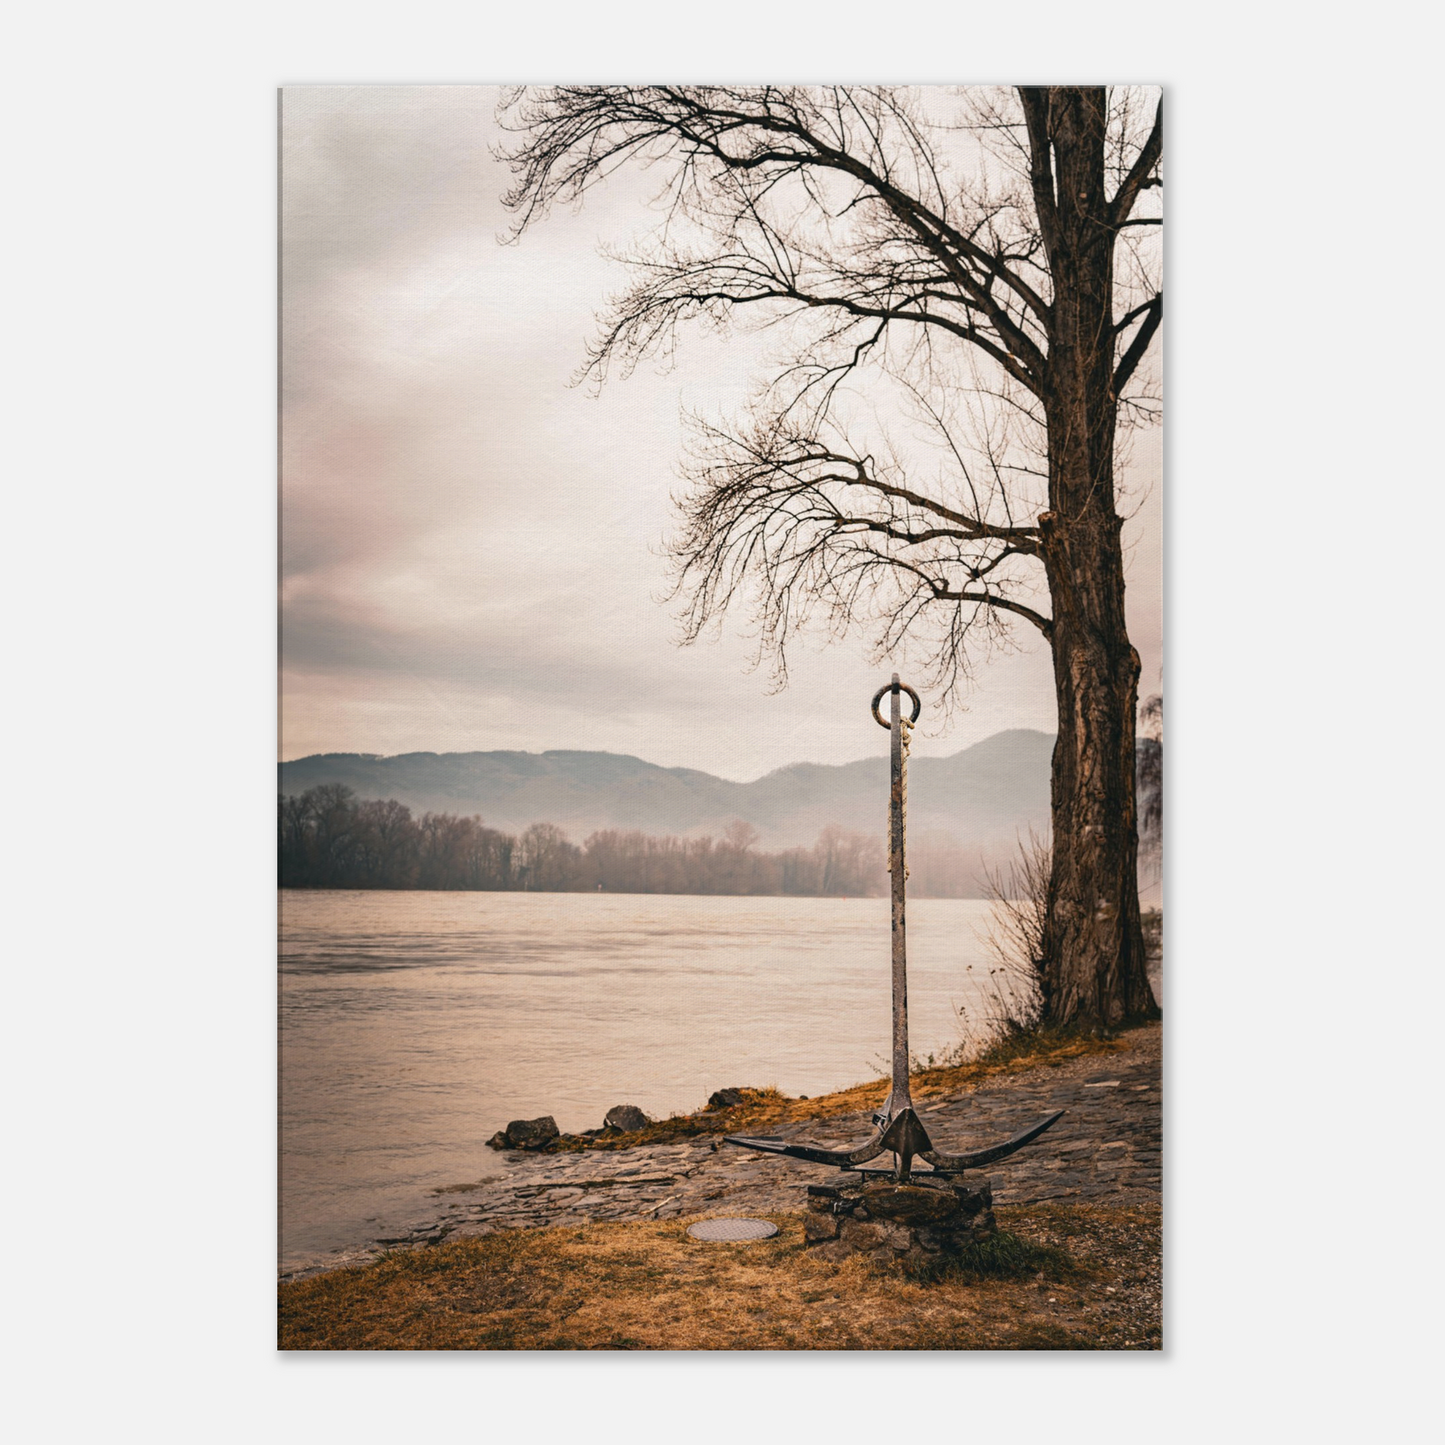 Danube Series - Riverside Anchor (Gallery-Wrapped Canvas or Aluminum Print)